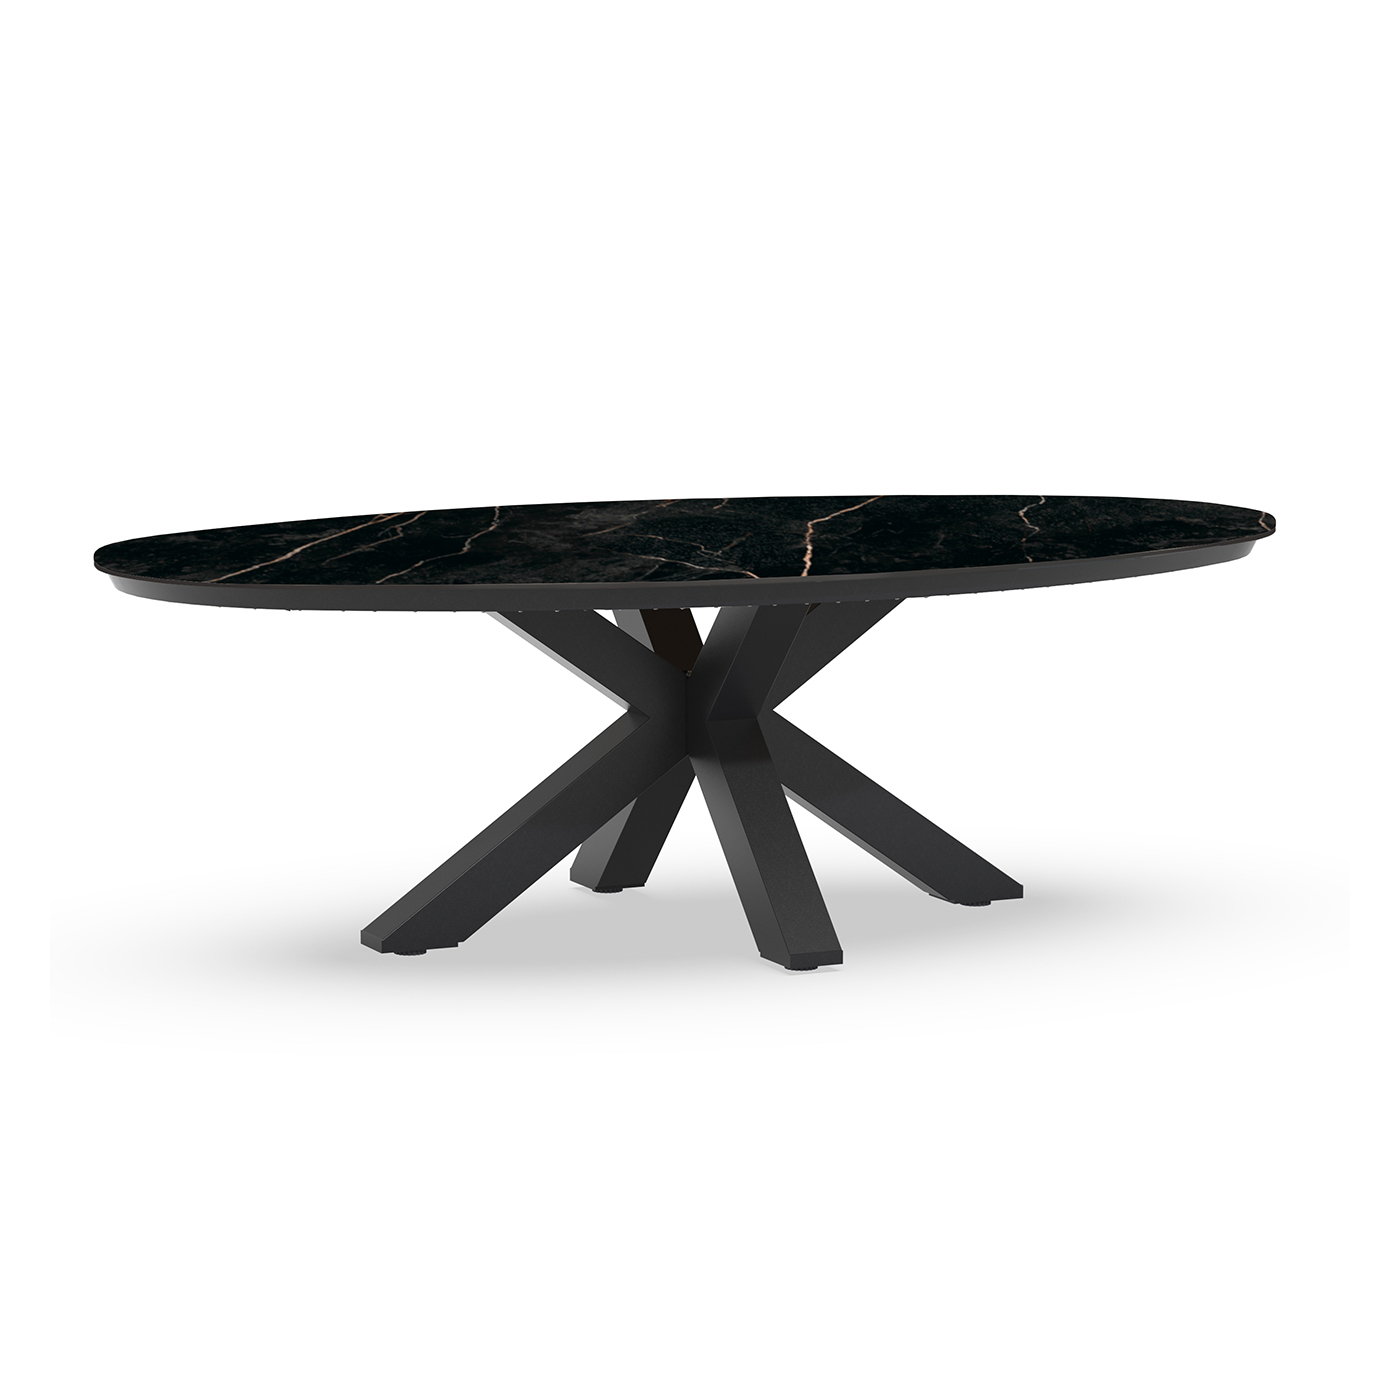 Oblong Low Dining Table Trespa Marble 220 x 130 cm Charcoal